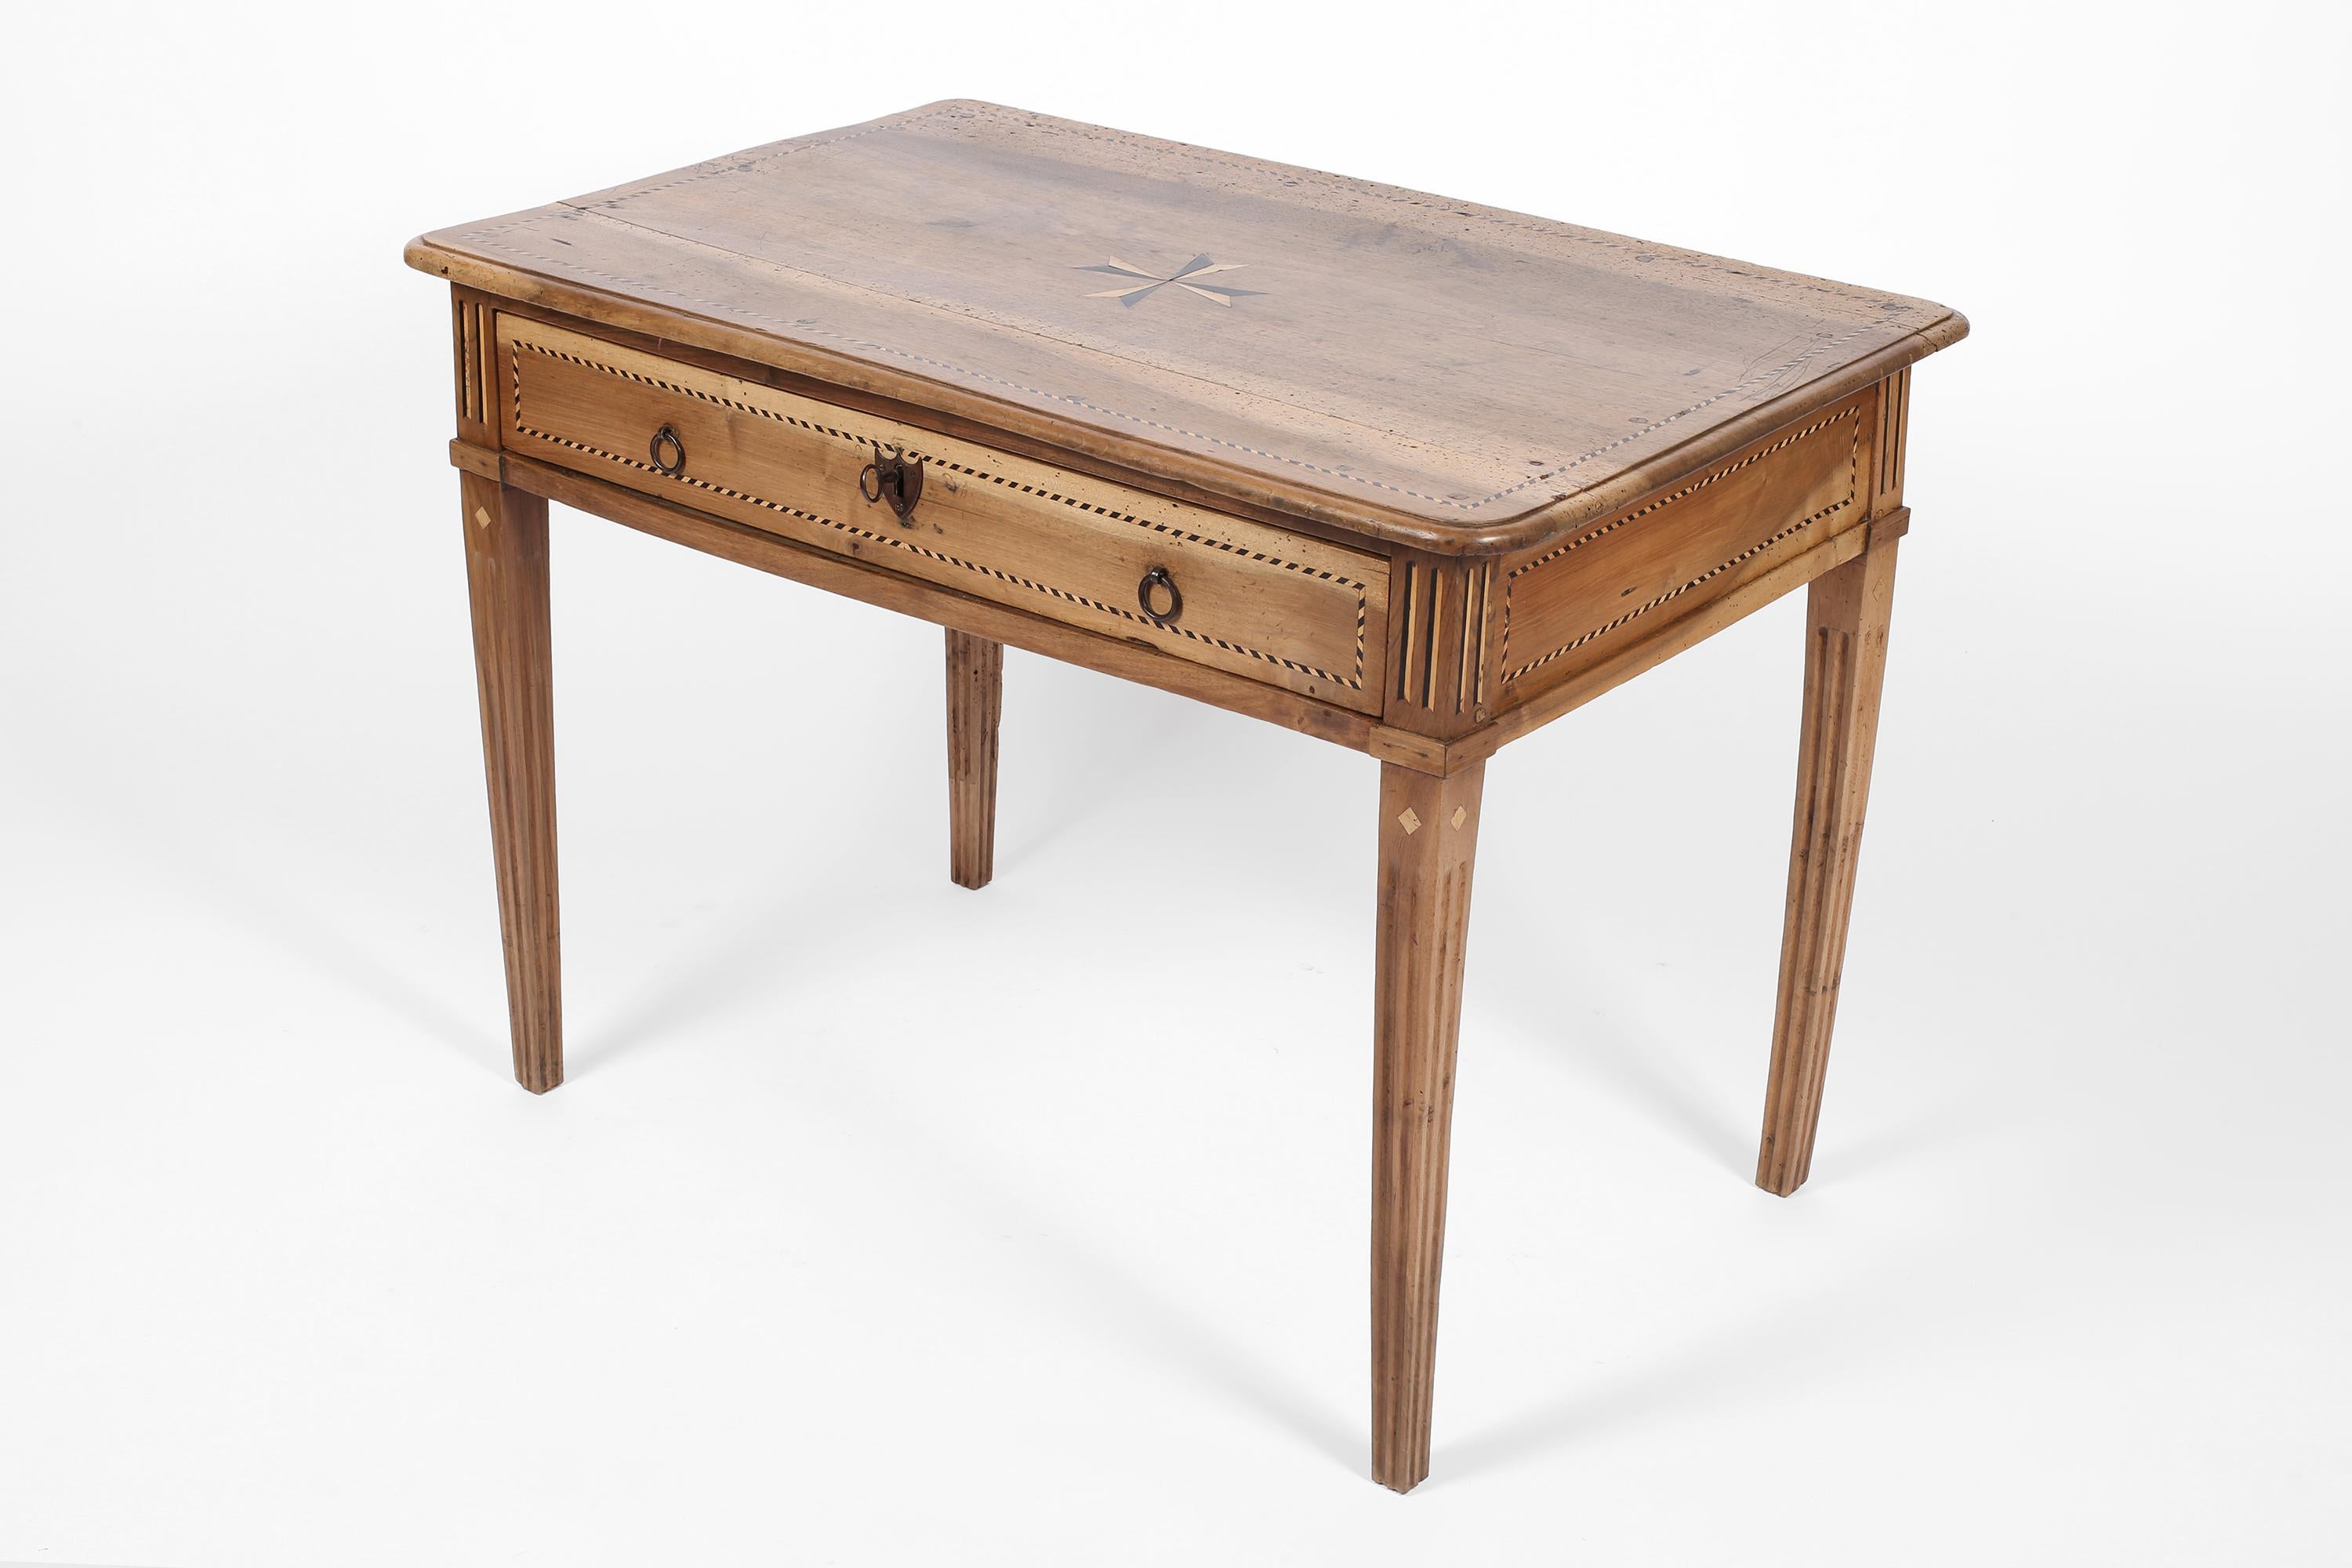 Spanish Charles IV Walnut Marquetry Writing Desk Side Table c. 1790 In Good Condition For Sale In London, GB